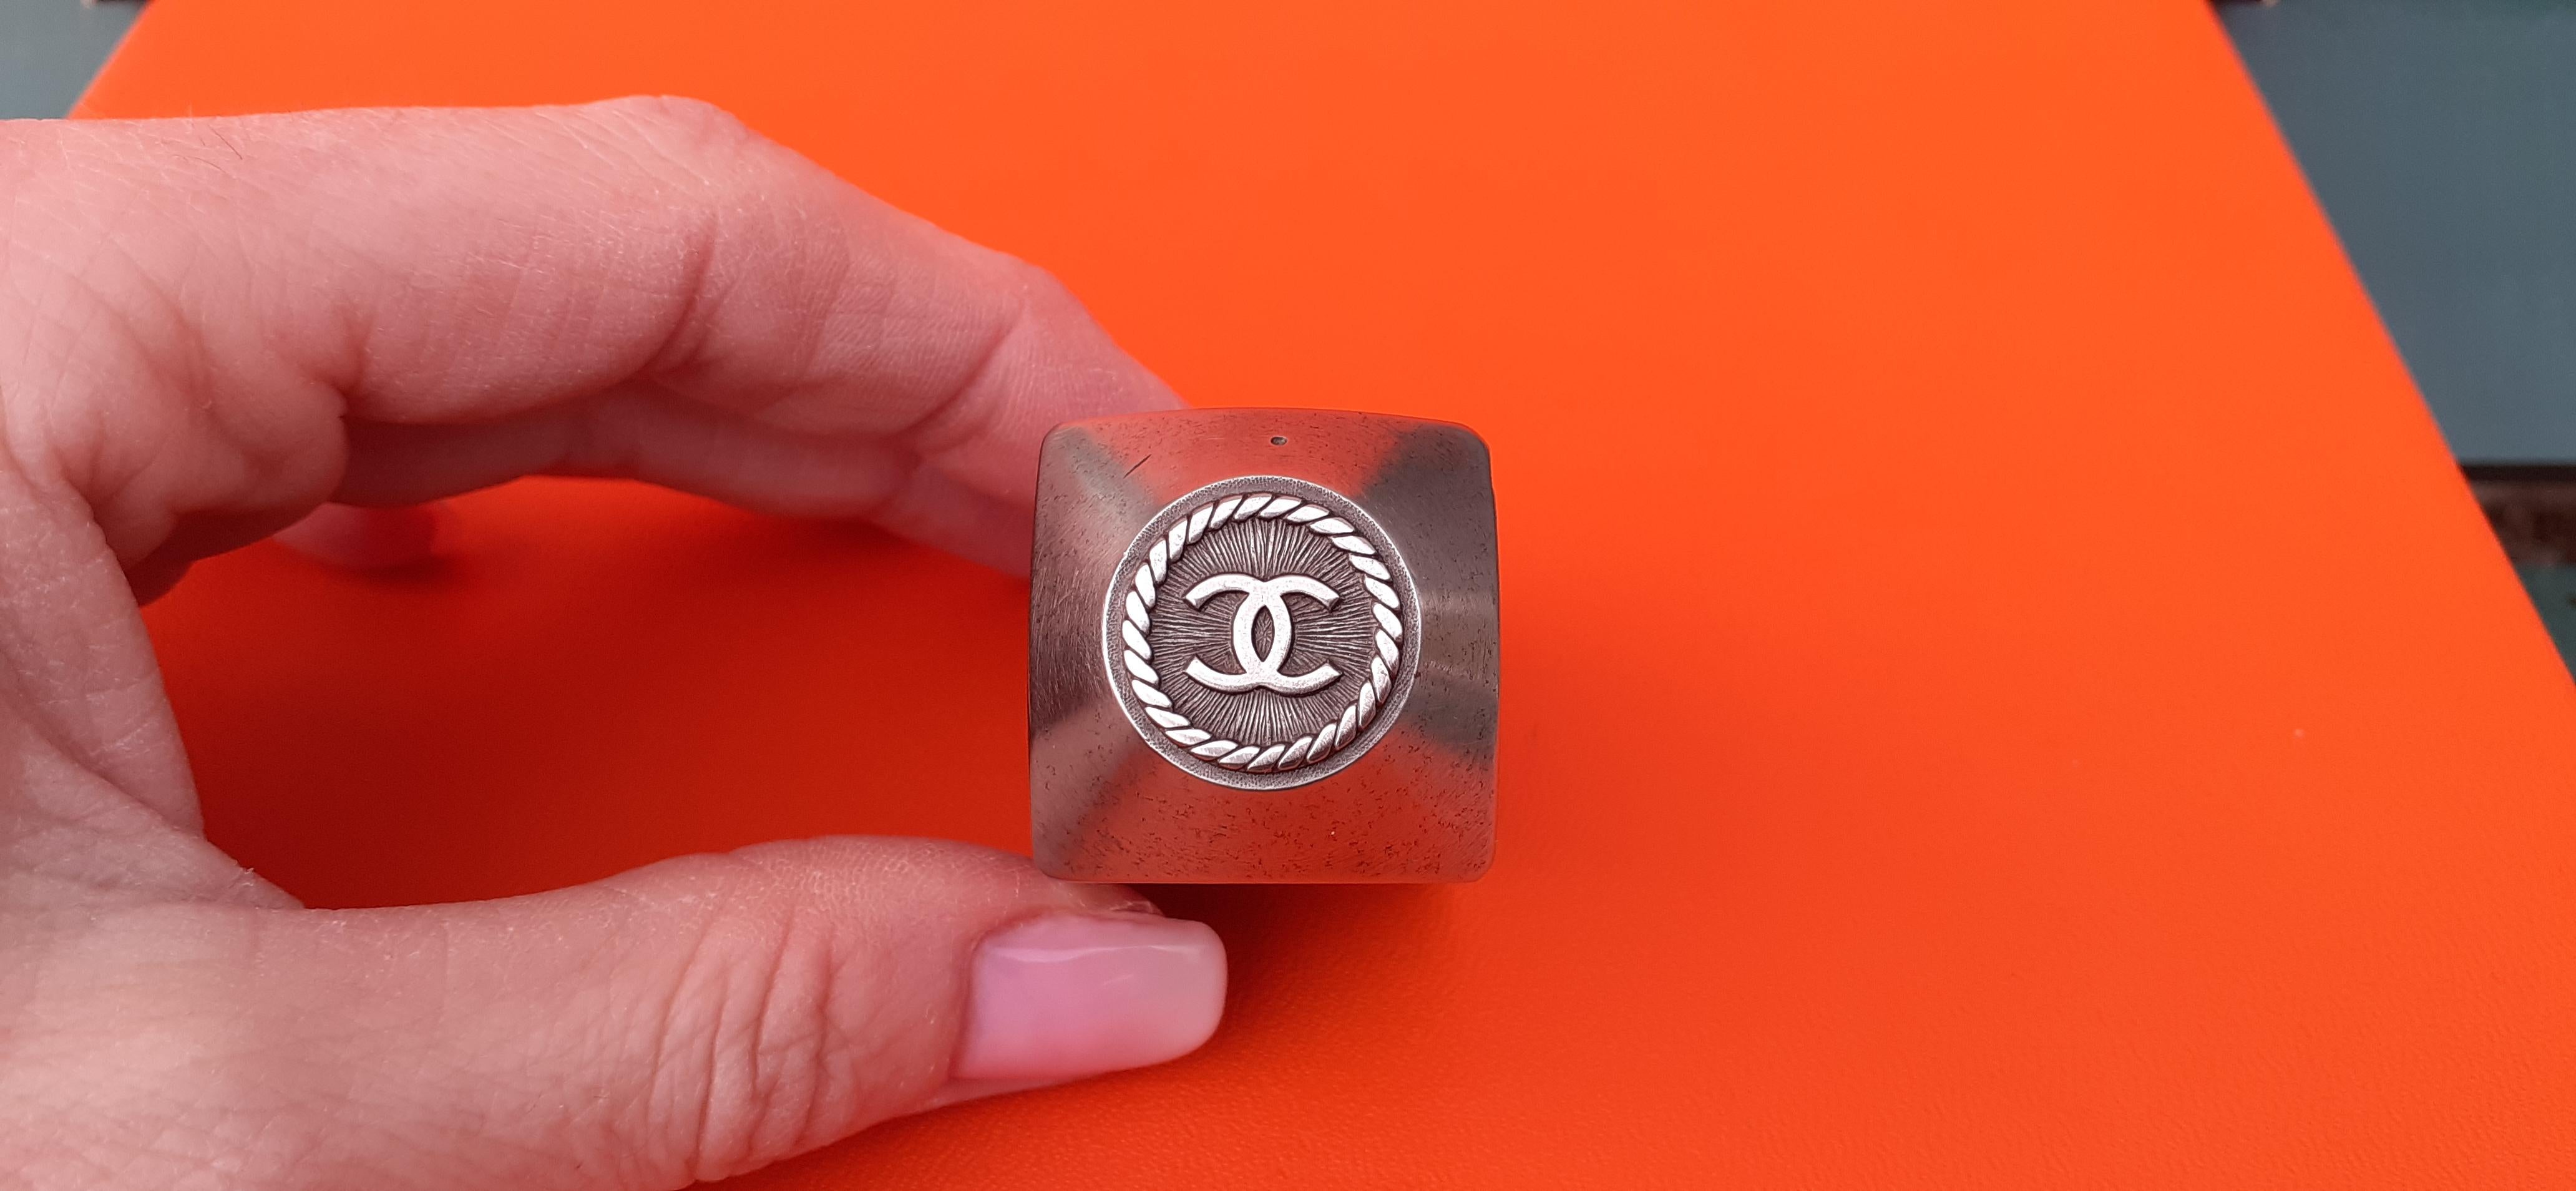 RARE Authentic CHANEL Matrix

Was used to make Chanel Buttons

Can be used for embossing, printing on nails, in wax seal etc ...

These are just ideas that haven't been tried.

Made of Silver-Tone Metal

Weight: around 260 Grams

Measurements: -
-